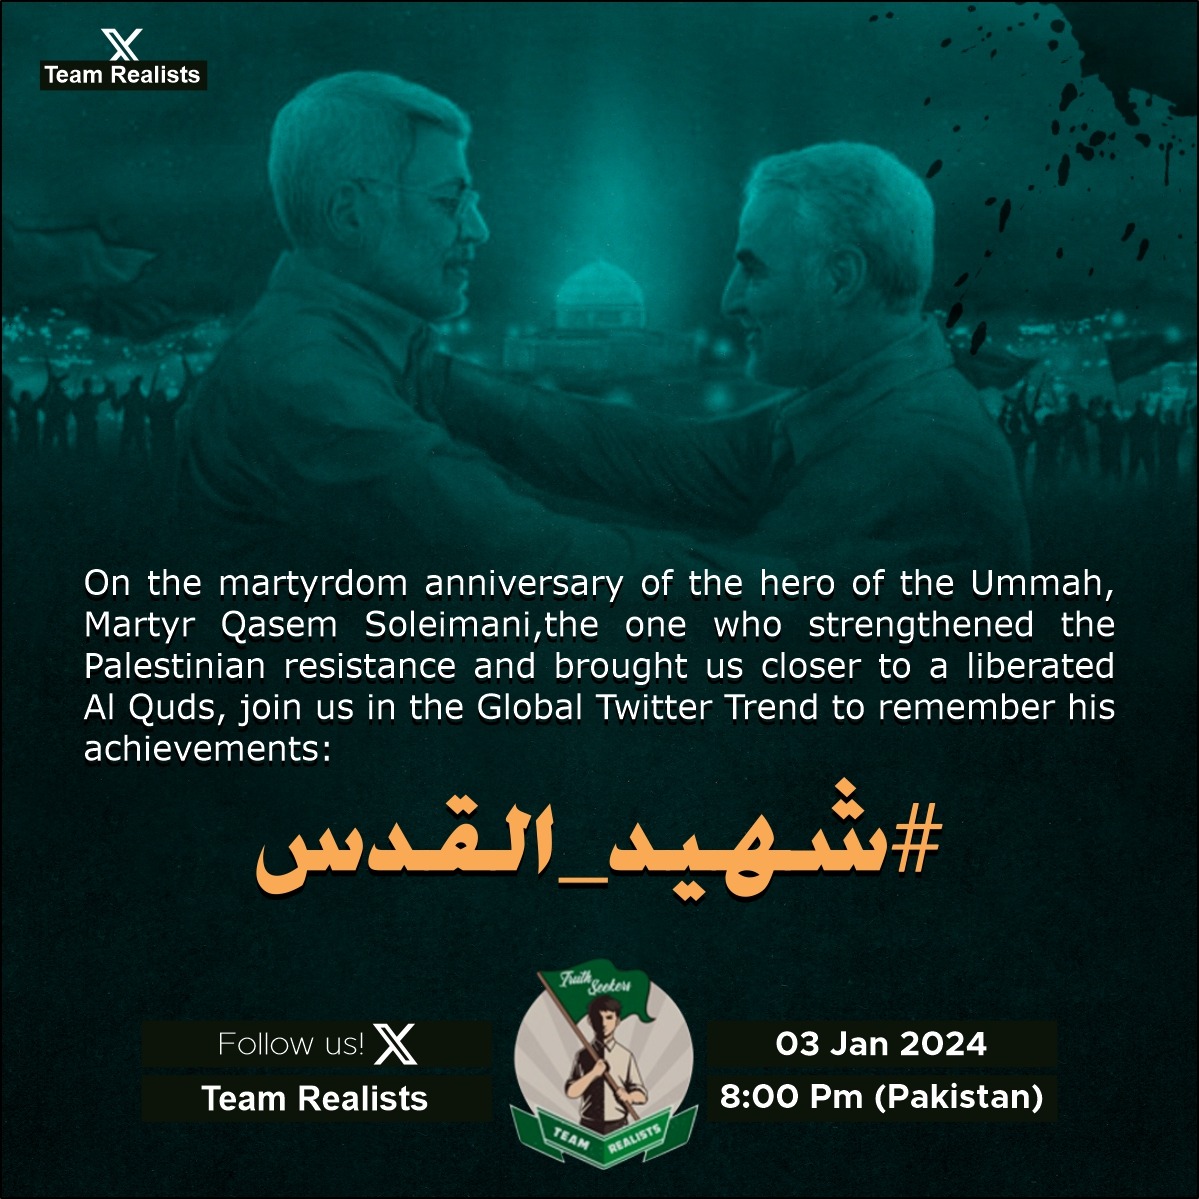 On the martyrdom anniversary of the hero of the Ummah, Martyr Qasem Soleimani, the one who strengthened the Palestinian resistance and brought us closer to a liberated Al Quds, join us in the Global Twitter Trend to remember his achievements: #شهيد_القدس 3 Jan @ 8 pm PST